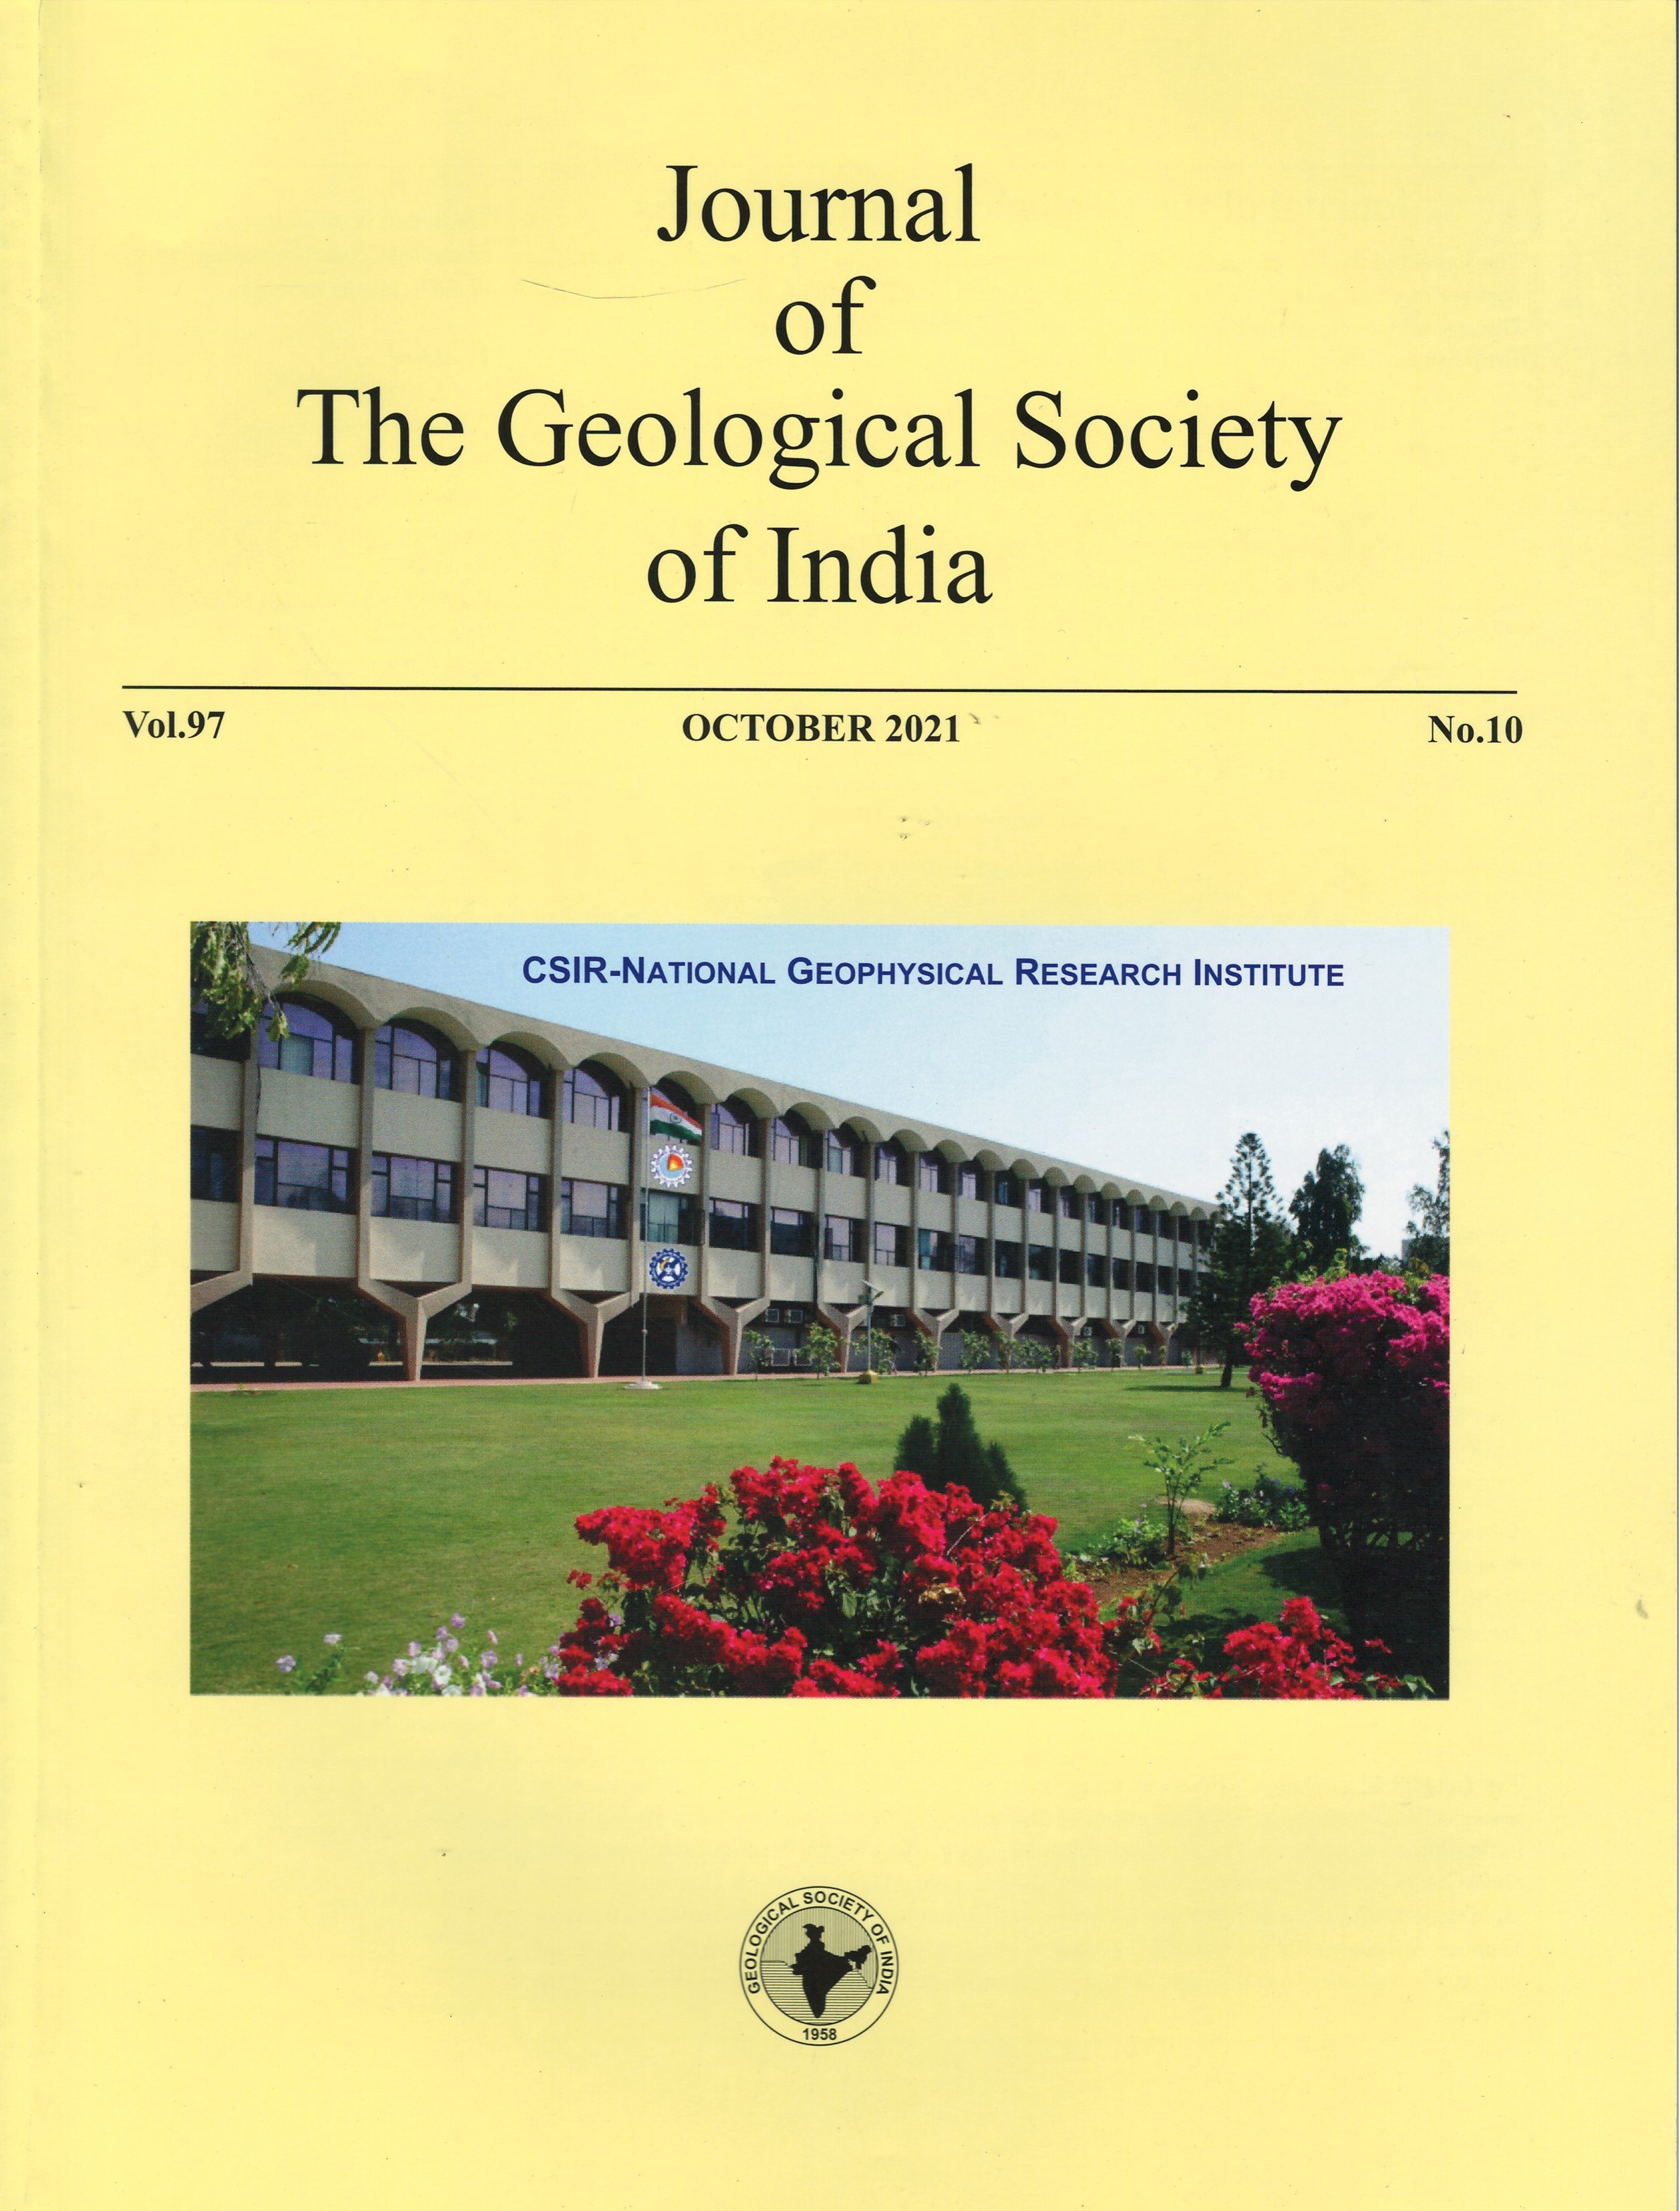 					View Volume 97, Issue 10, October 2021 Pages (1117-1322) (Special Issue 60 Years of CSIR-National Geophysical Research Institute).
				